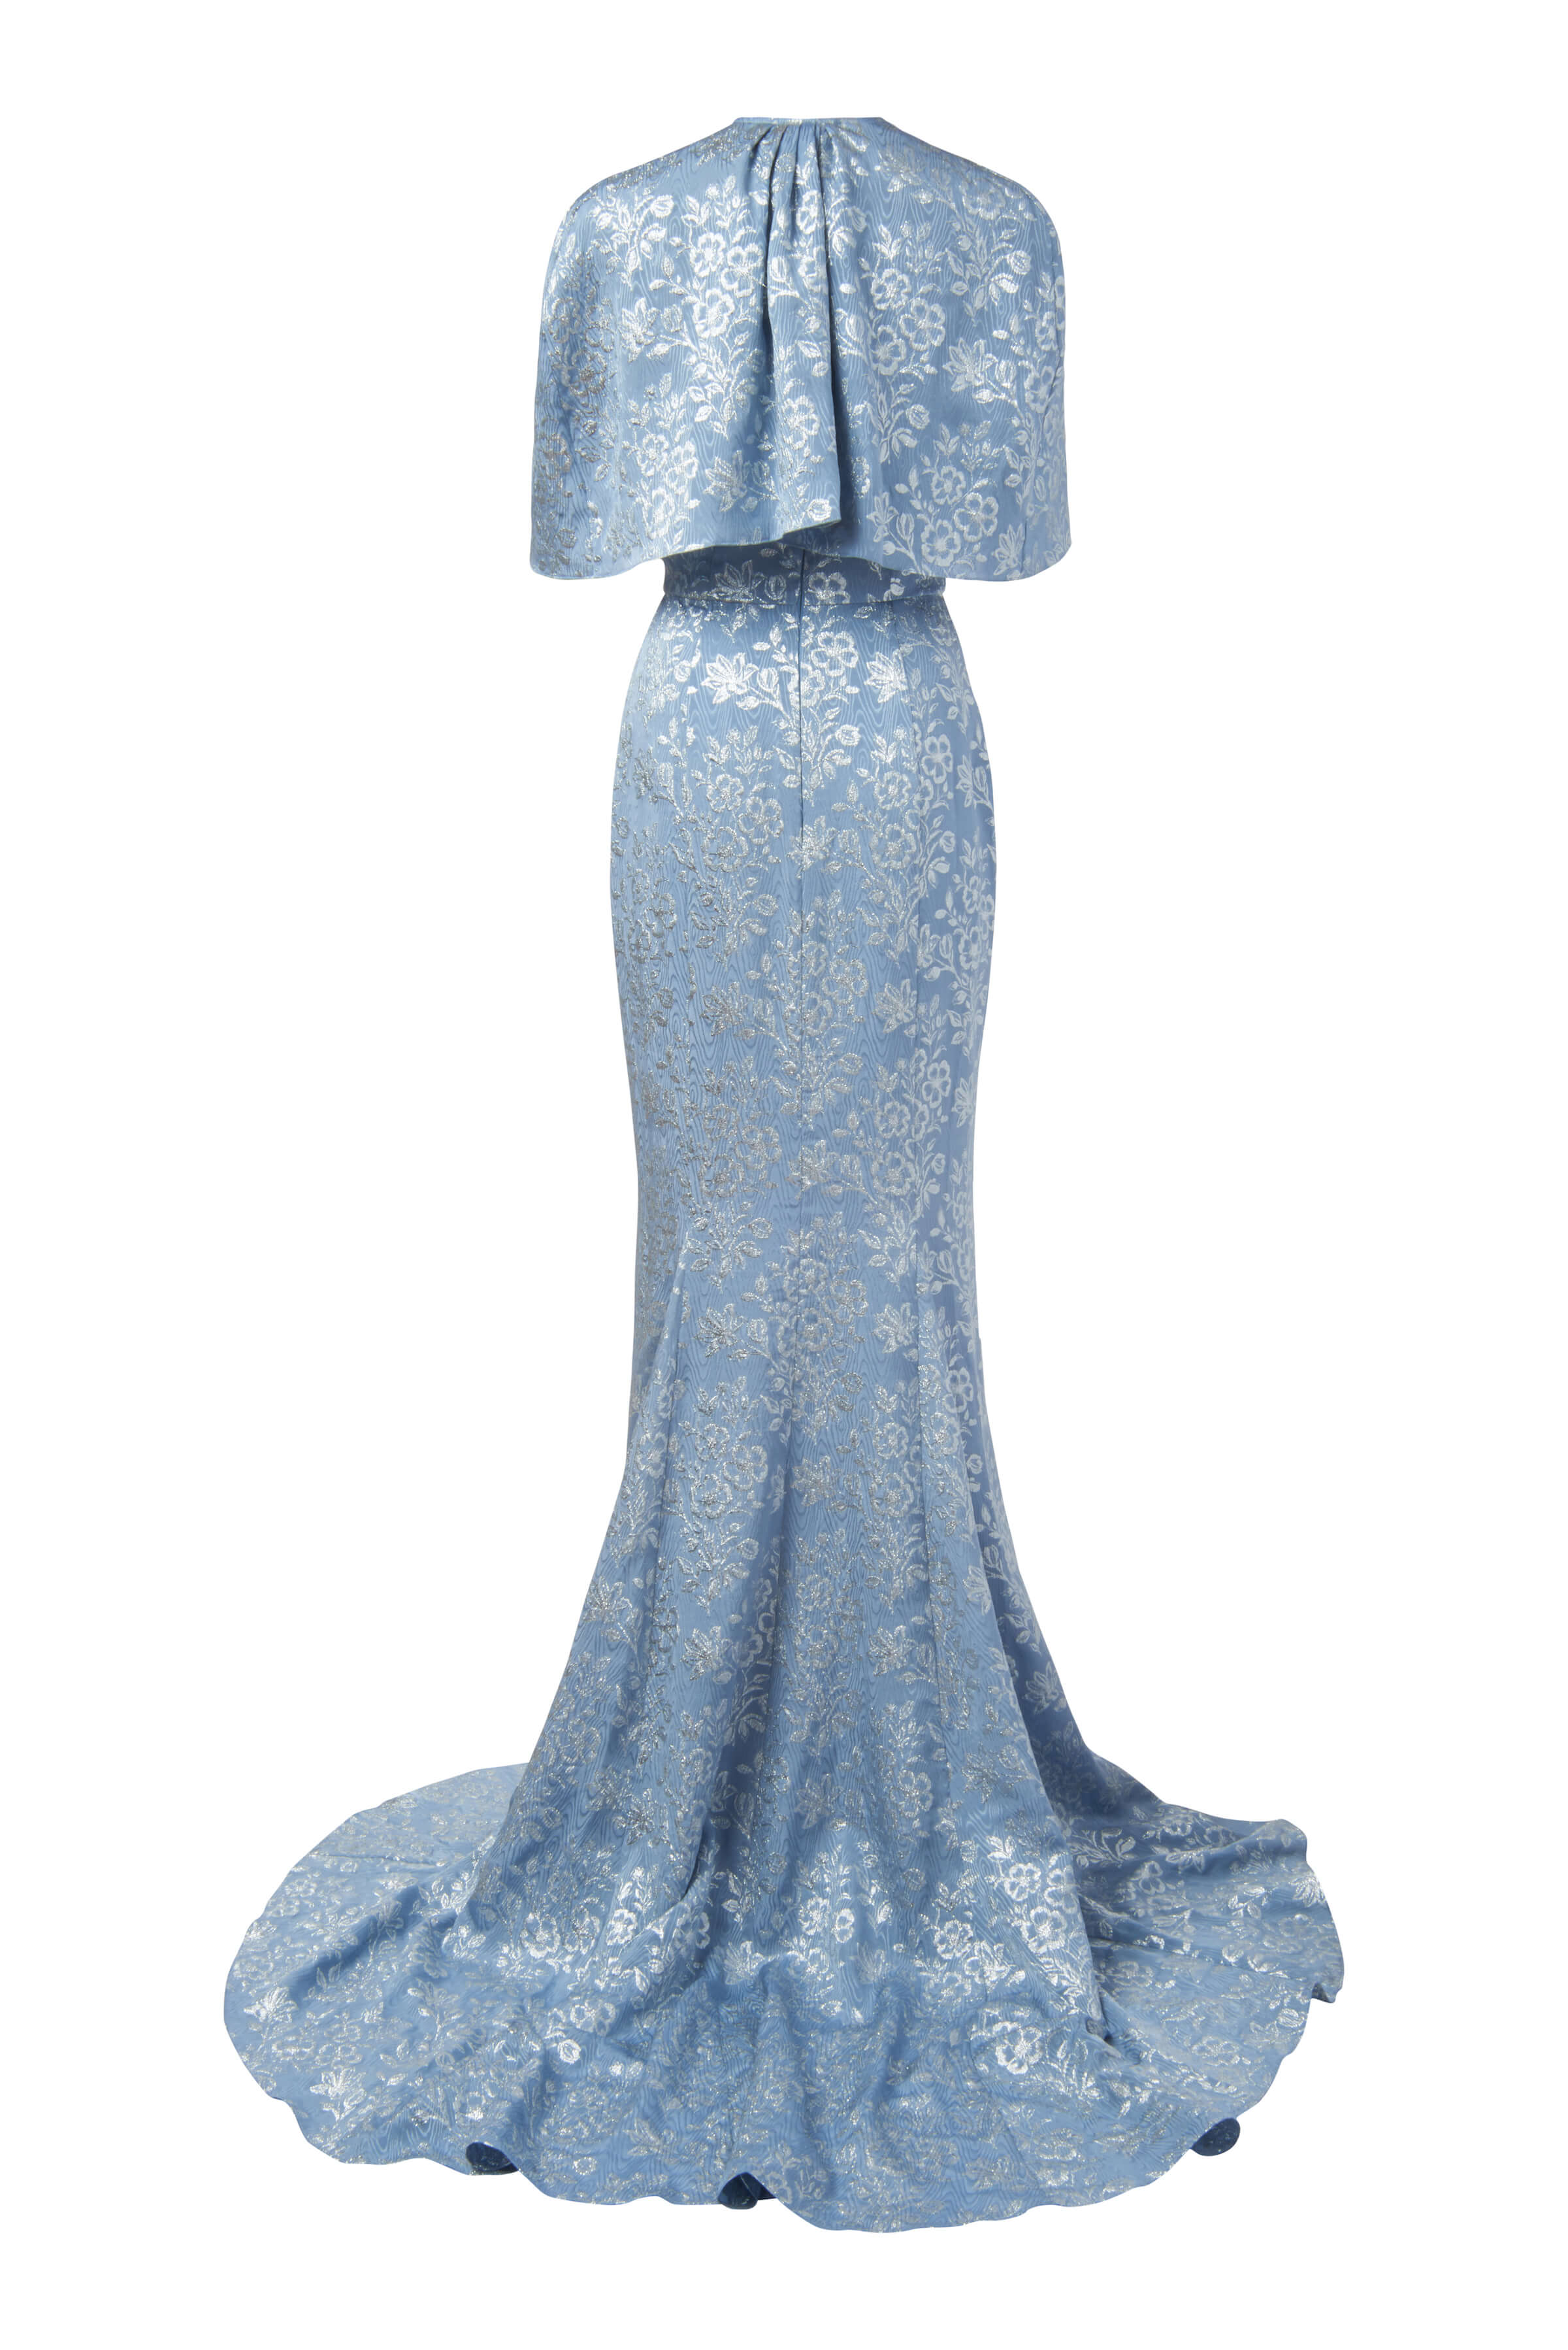 Leonora Blue Metallic Floral Strapless Gown With Sweetheart Neckline And Capelet